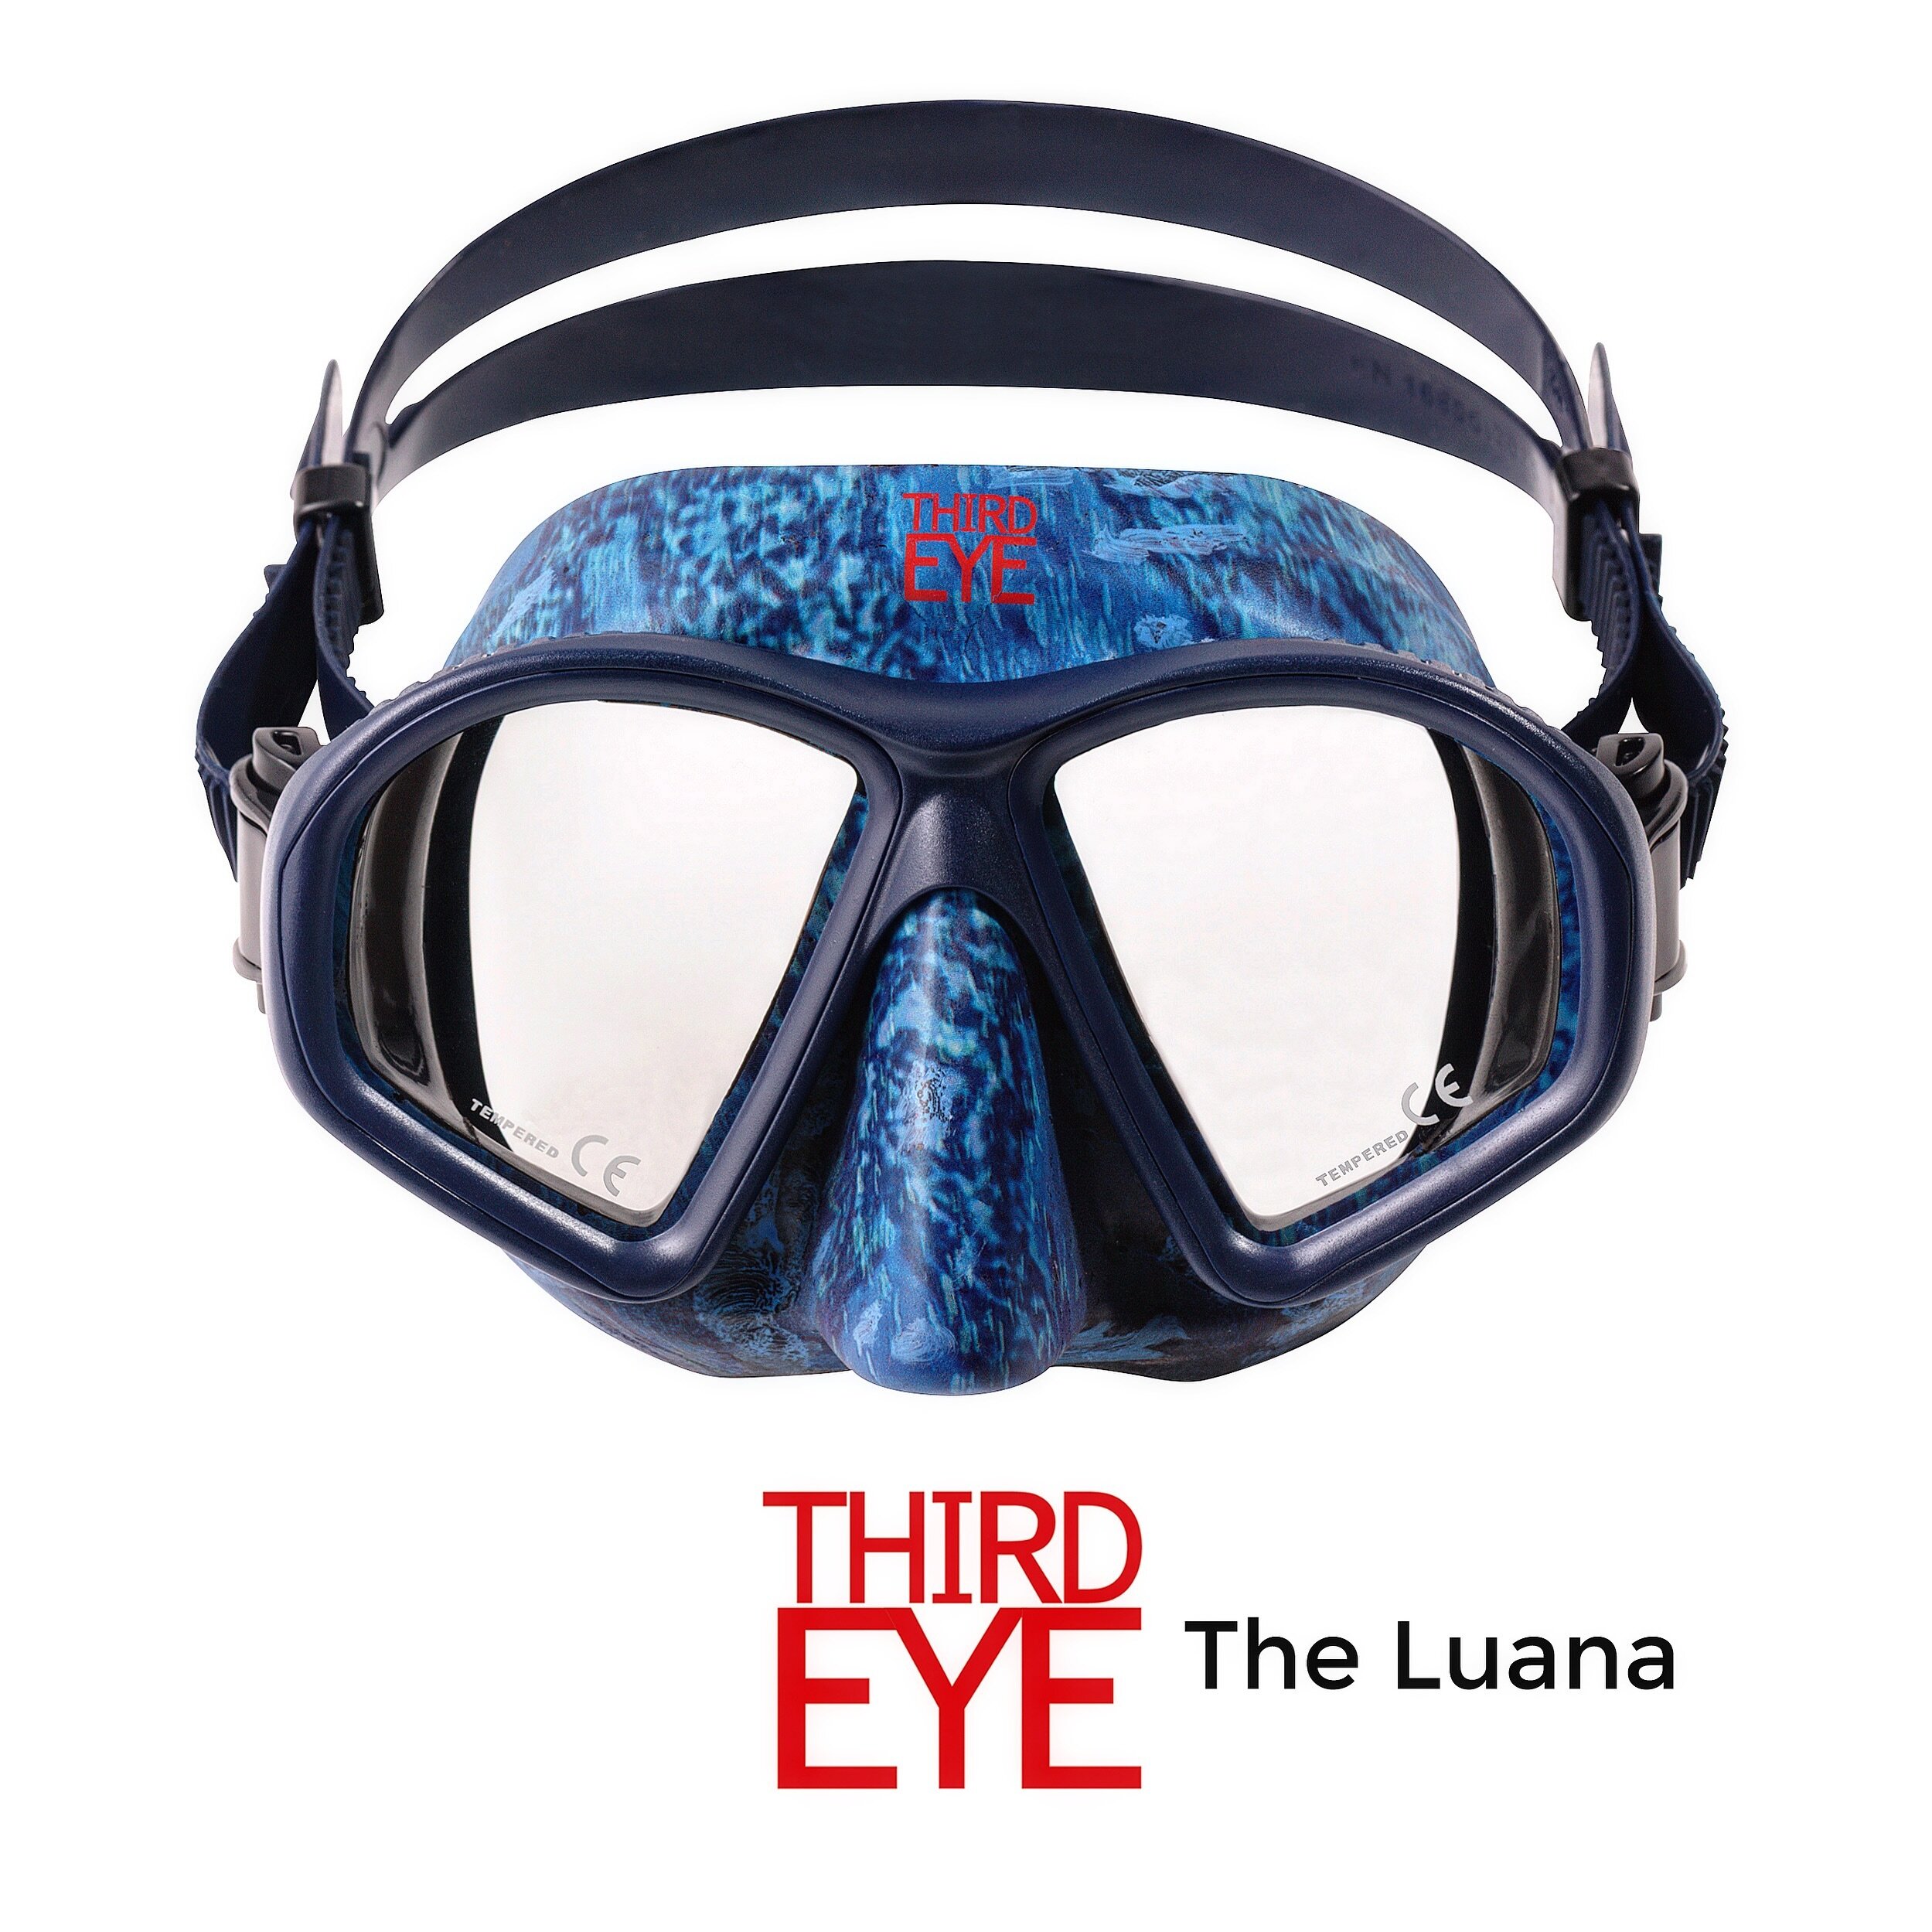 Meet the LUANA, THIRD EYE&rsquo;s low volume dive mask in our signature blue camo color:

&bull; Ultra clear tempered glass with extended downward view
&bull; 100% silicone skirt and strap for maximum comfort
&bull; Supple skirt makes for easy equali